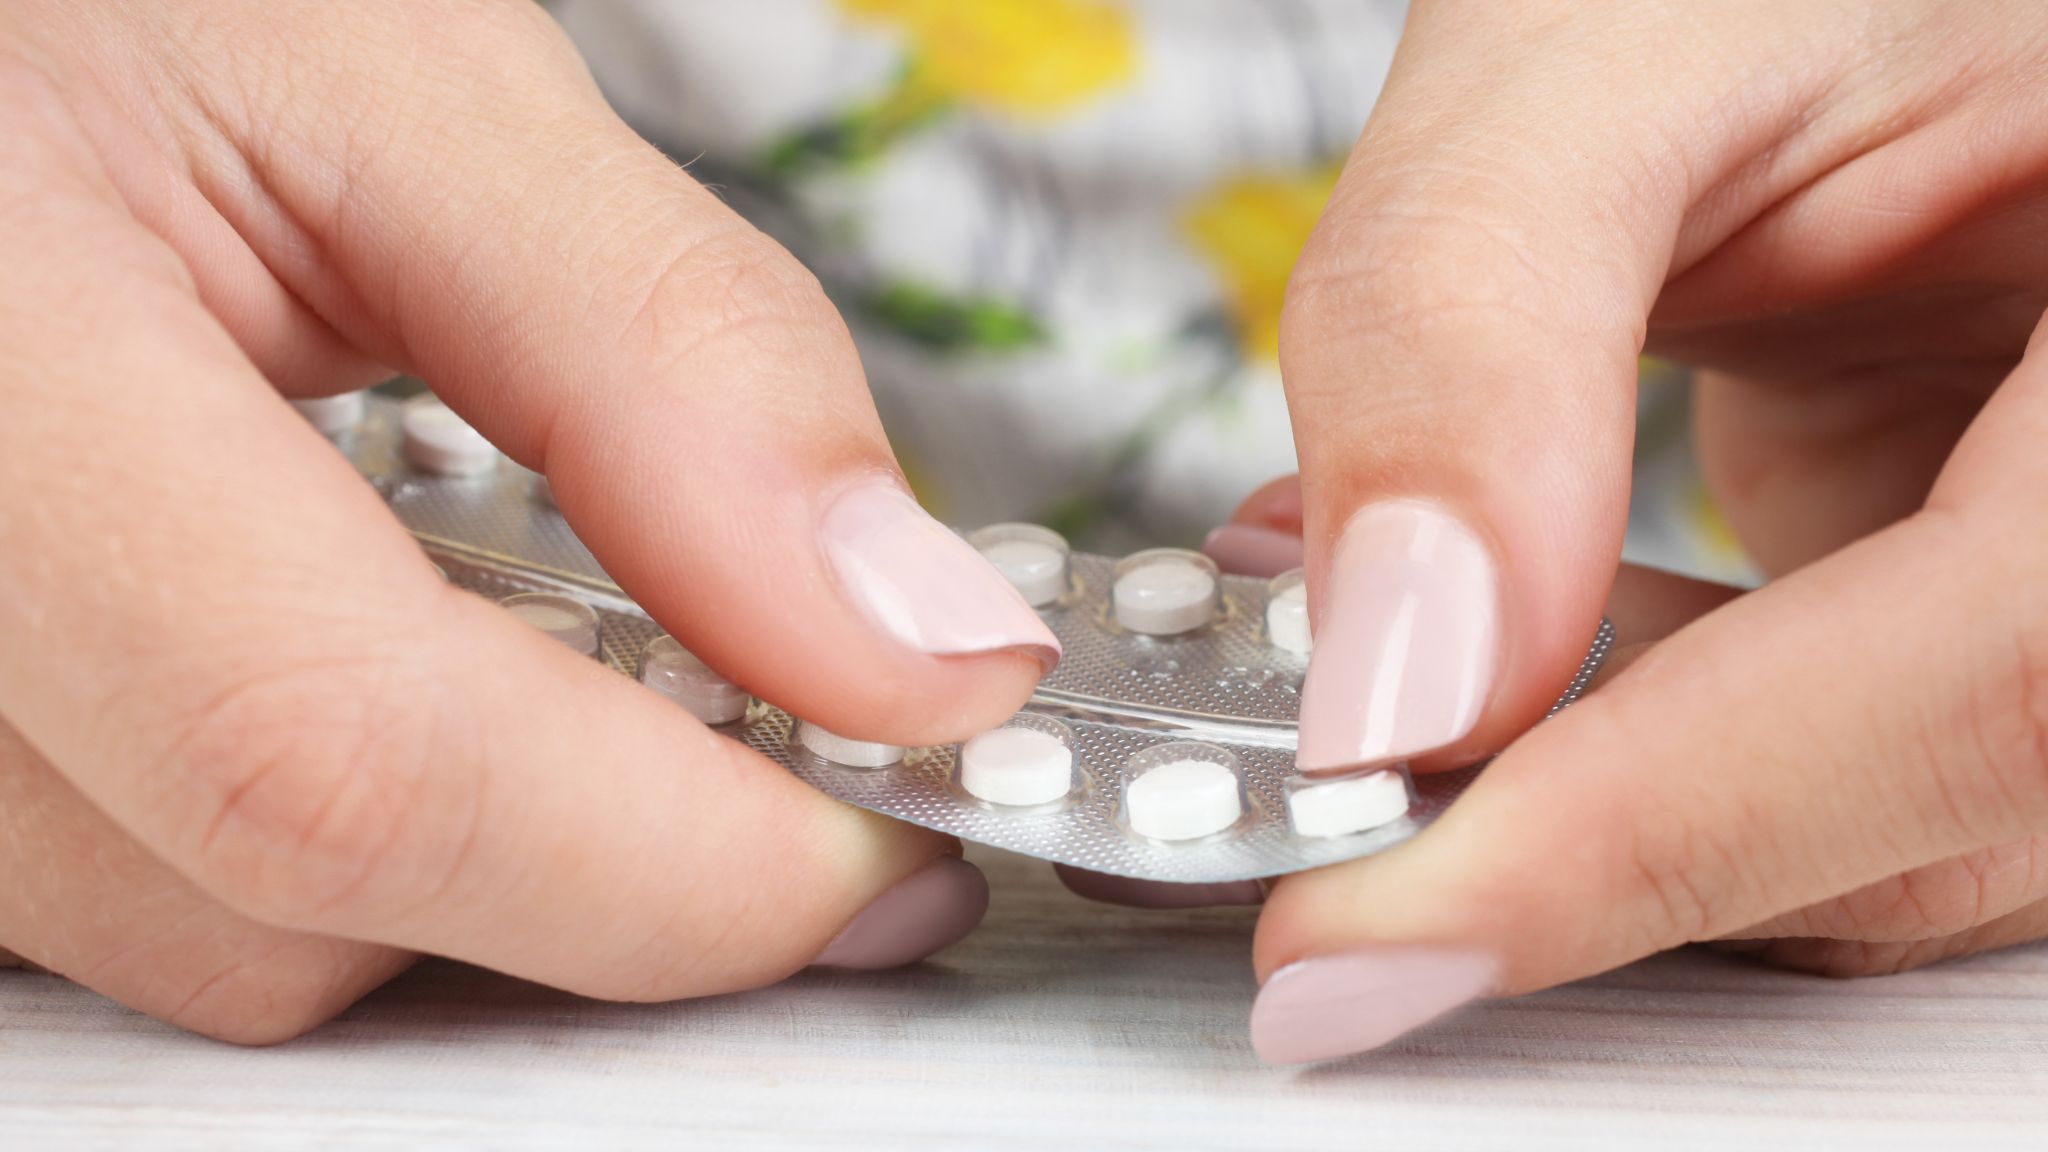 Contraception and Chronic Pain